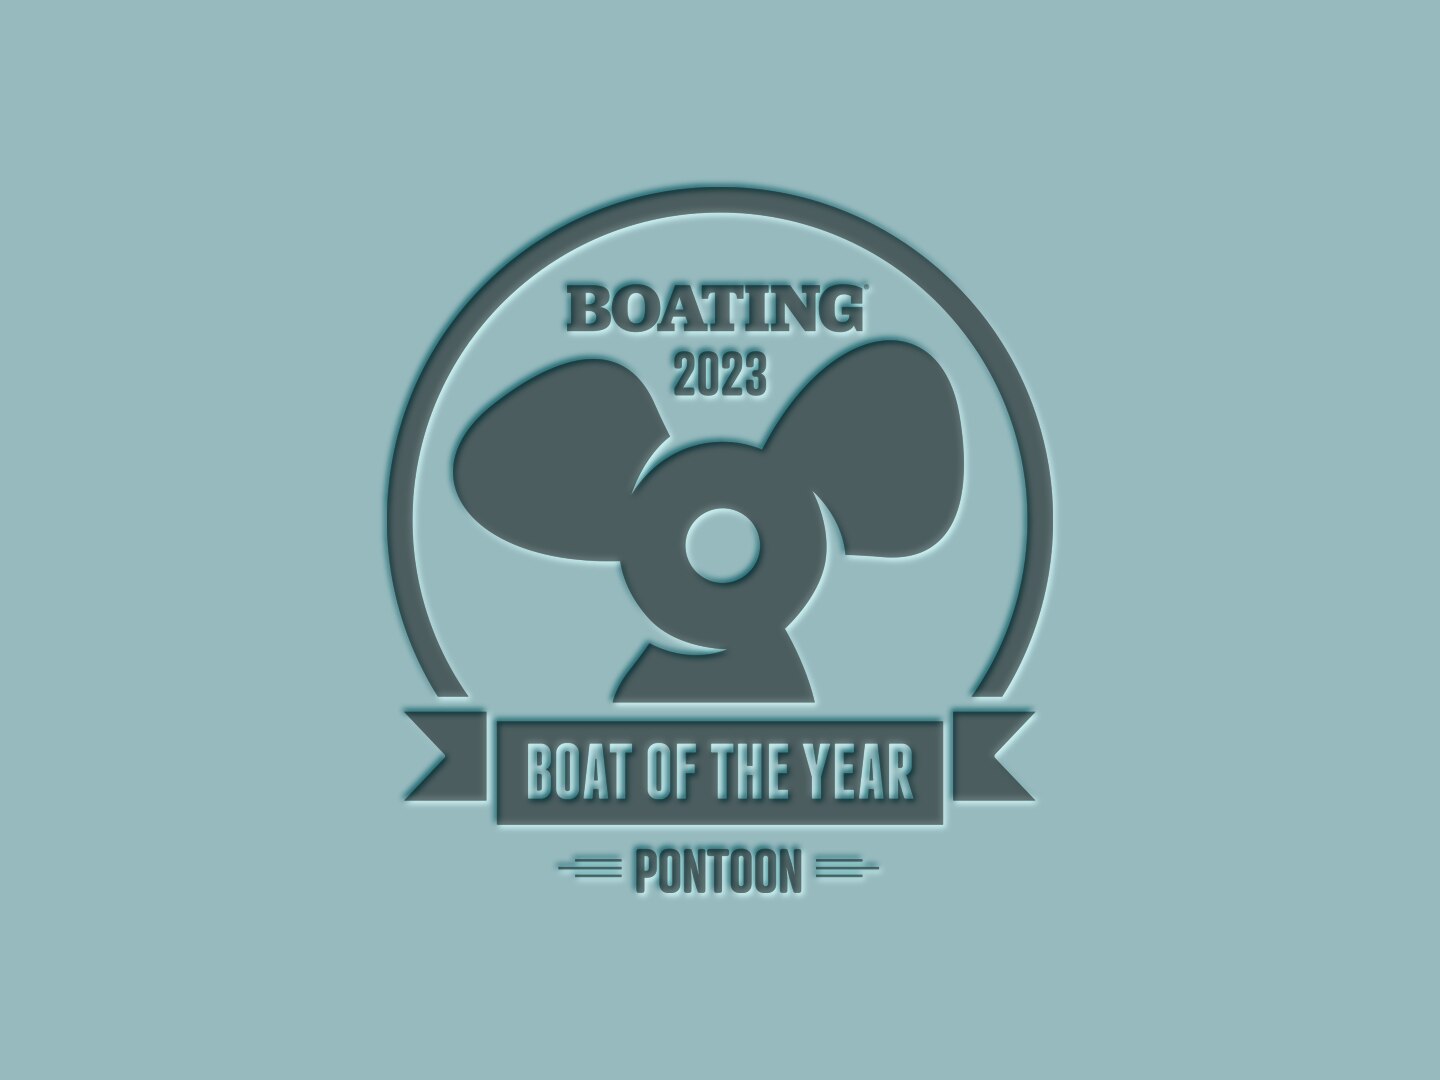 Manitou Redefines Design and Sets a New Standard as BOATING Magazine's Pontoon Boat of the Year